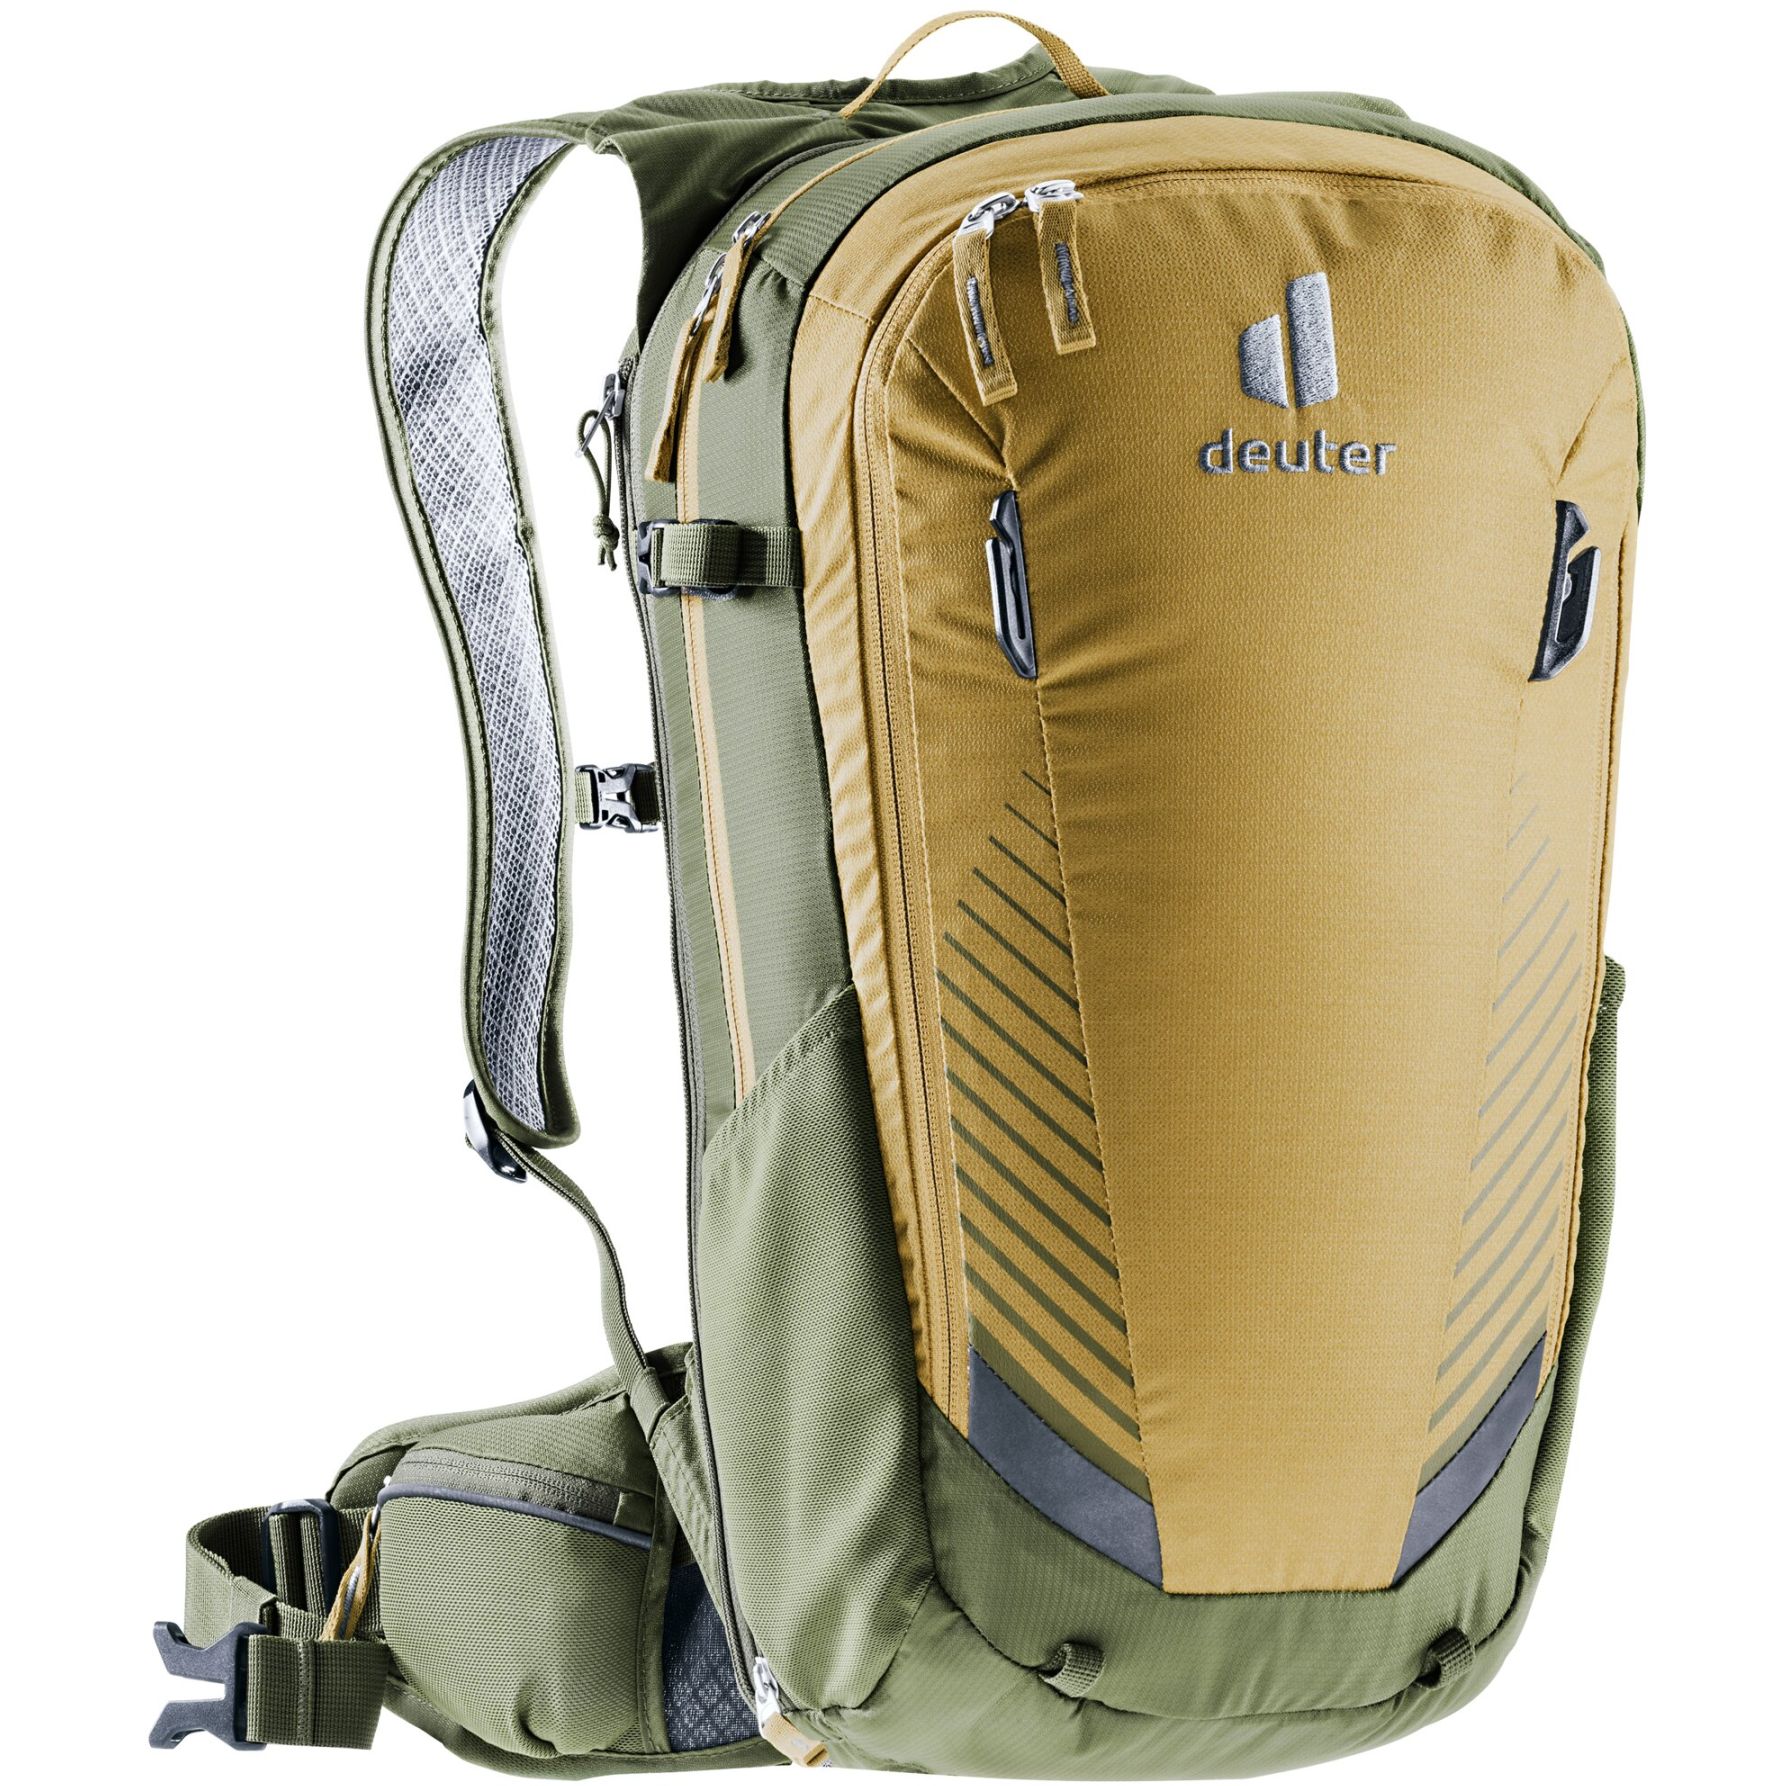 Picture of Deuter Compact EXP 14 Backpack - caramel-khaki